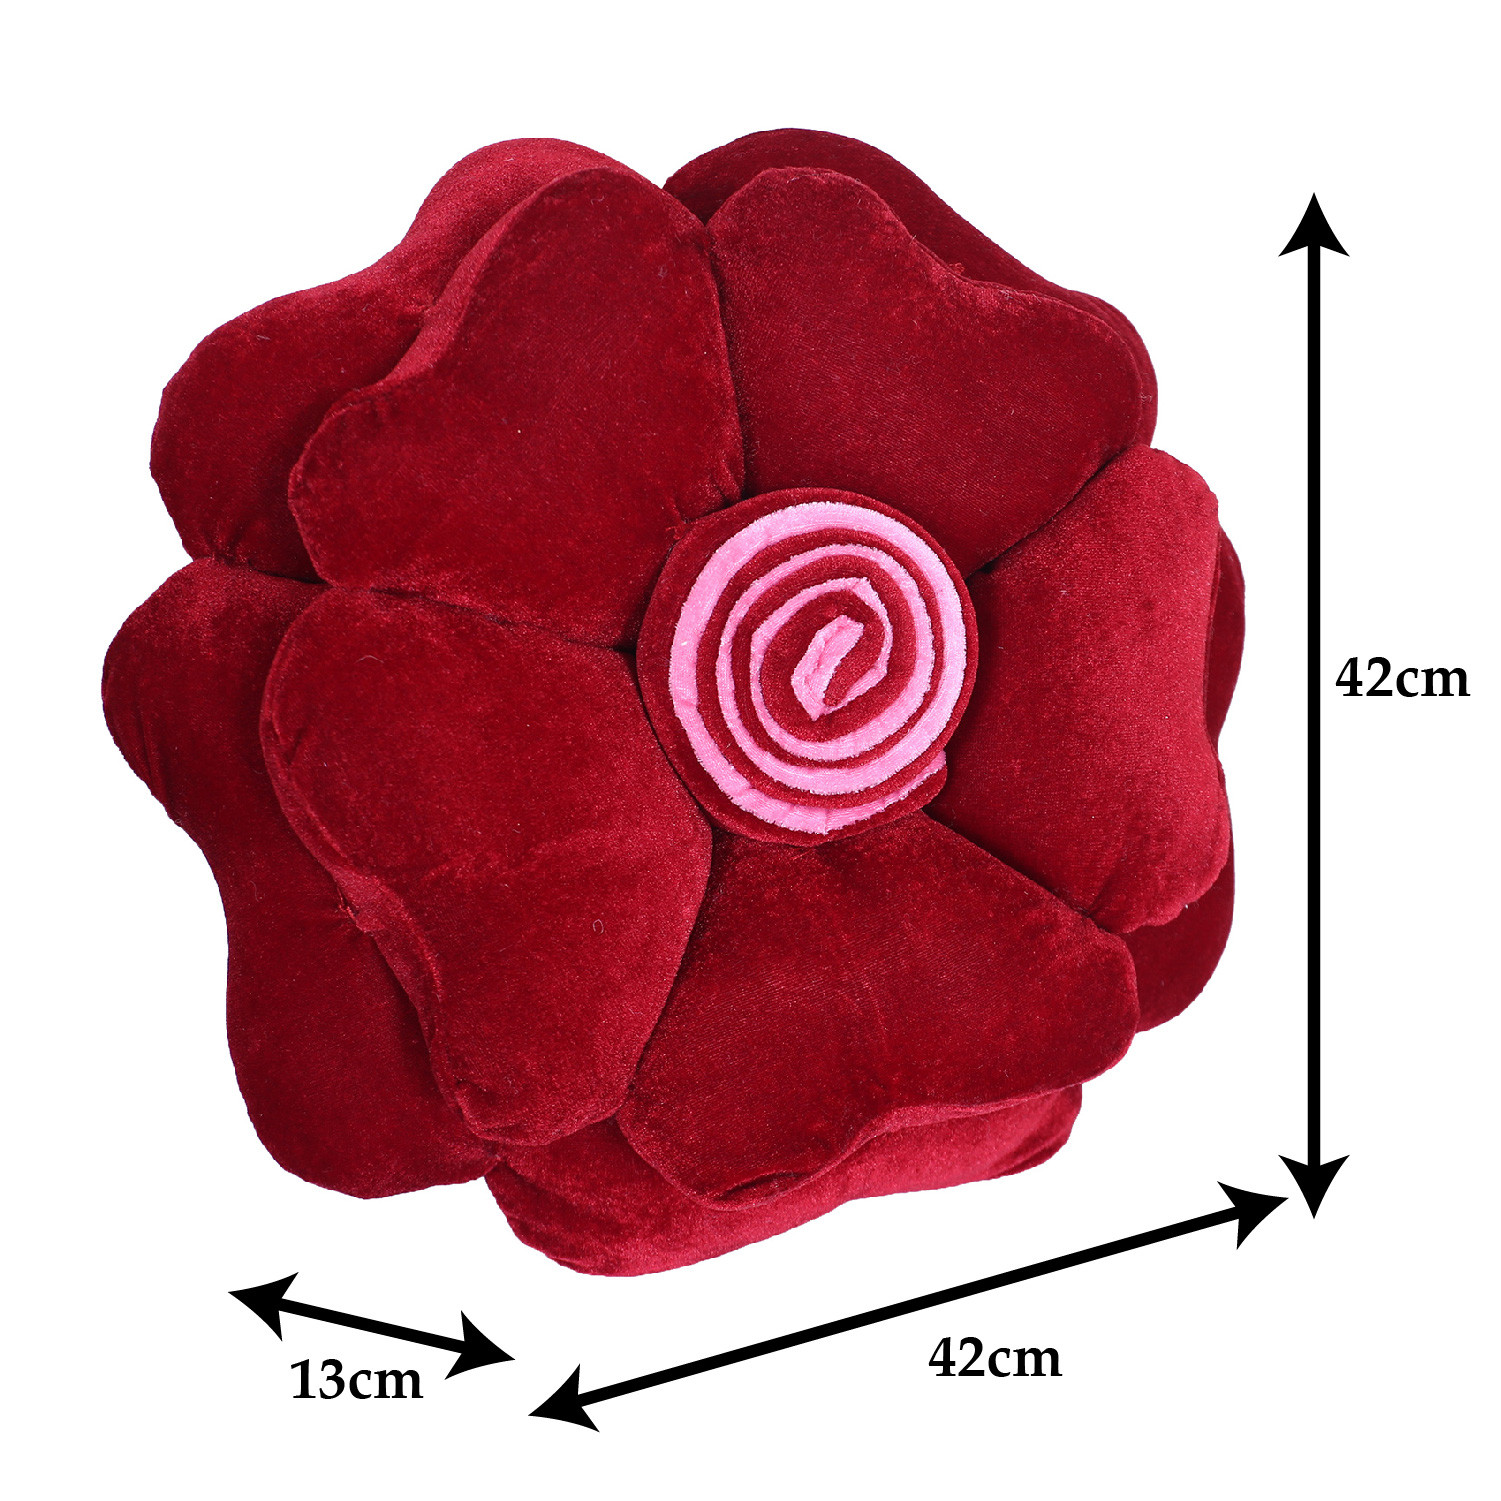 Kuber Industries Rose Flower Shaped Pair Cushion|Soft & Decorative Cushions for Living Room Bed,Sofa,Seating Area,16 Inch,(Red)